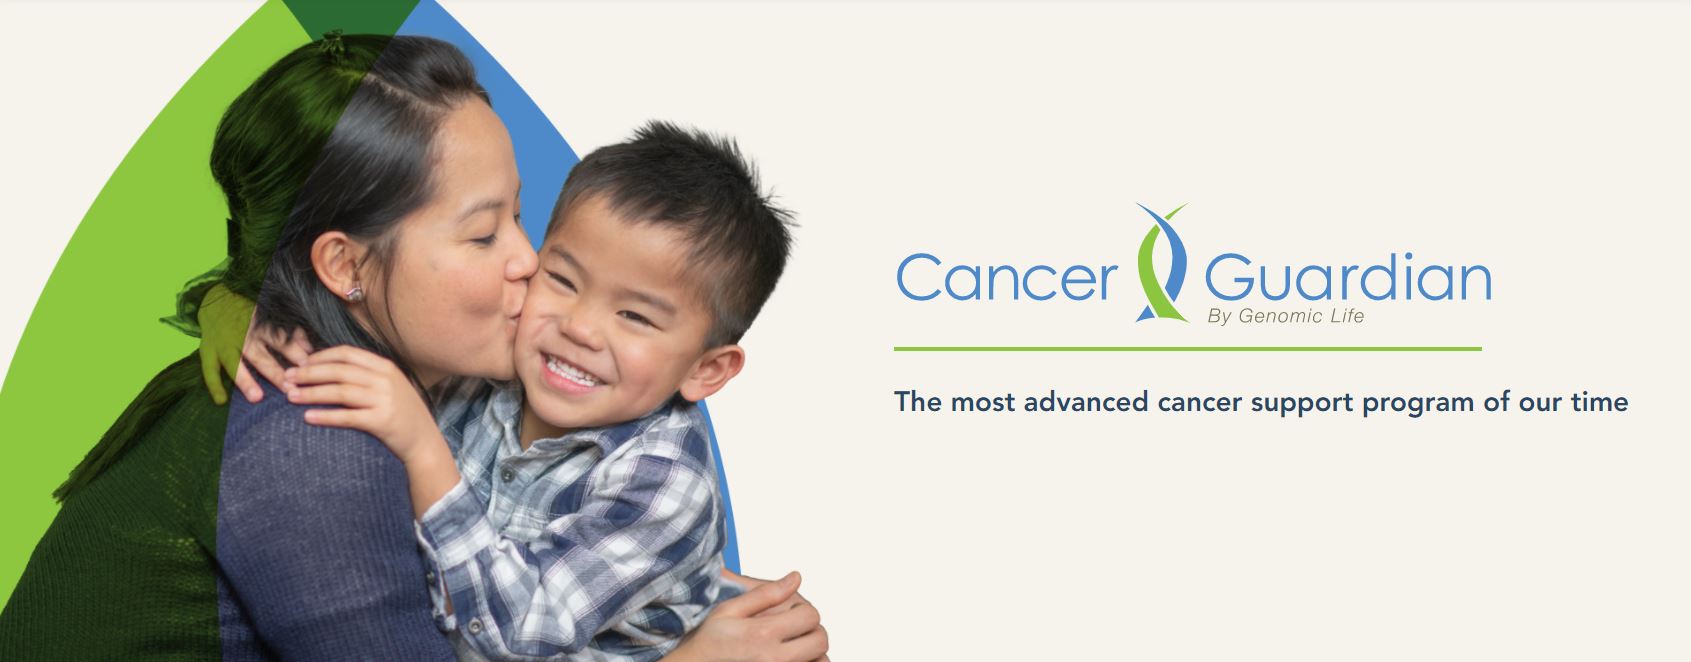 Cancer Guardian by Genomic Life - vendor materials